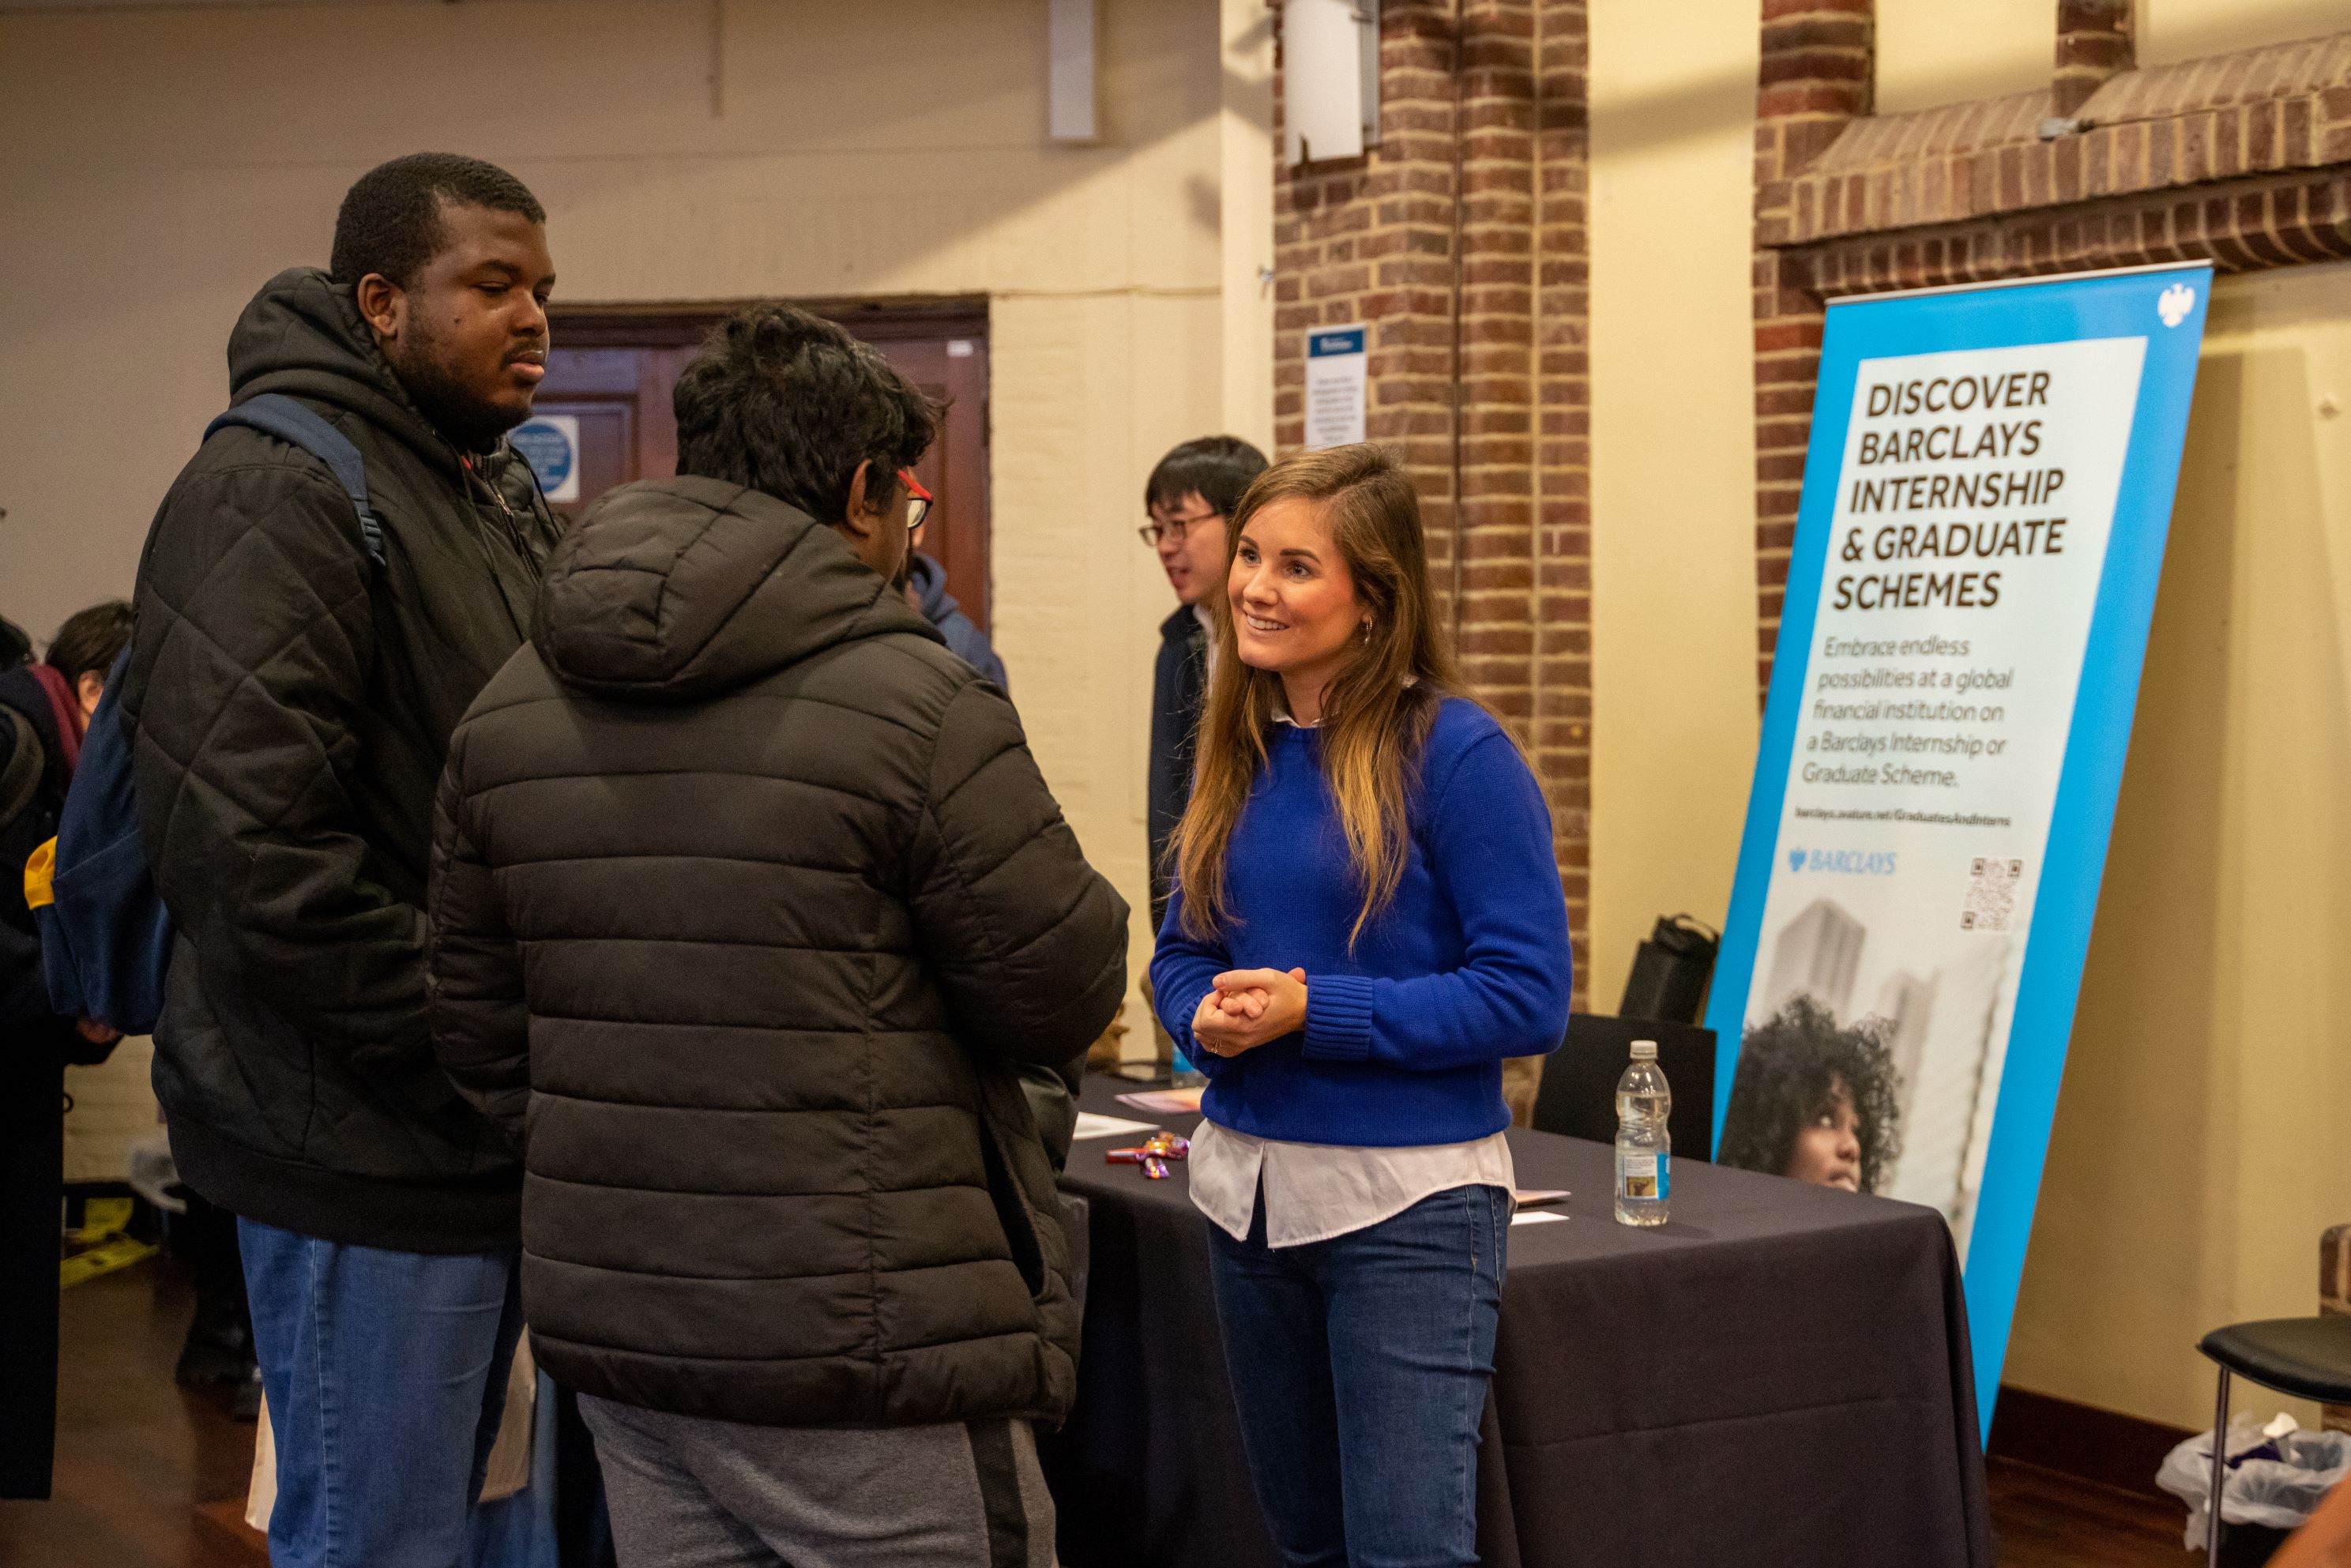 2 students in conversation with an advisor at a graduate event